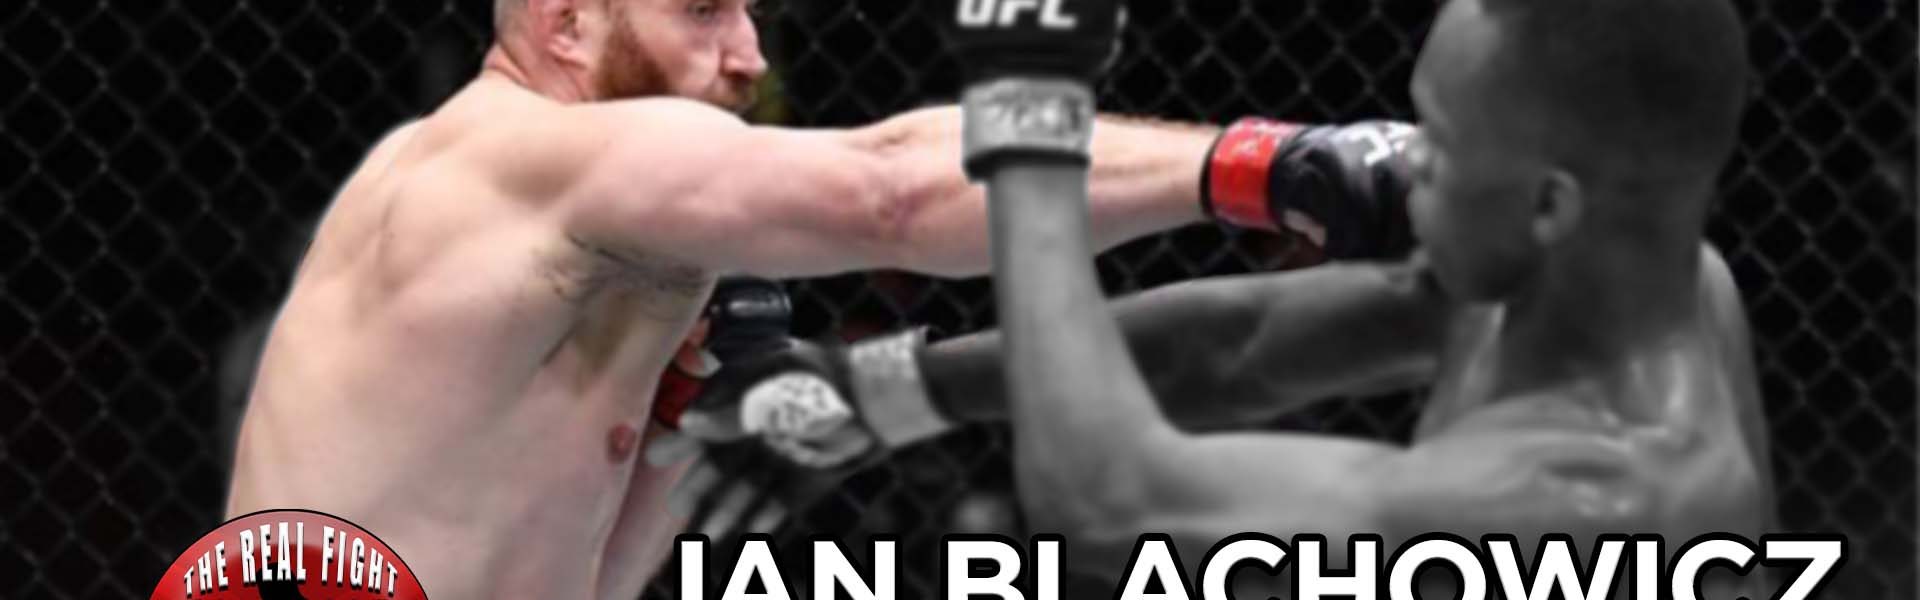 Jan Blachowicz il dominatore - The Real FIGHT Talk Show Ep. 38